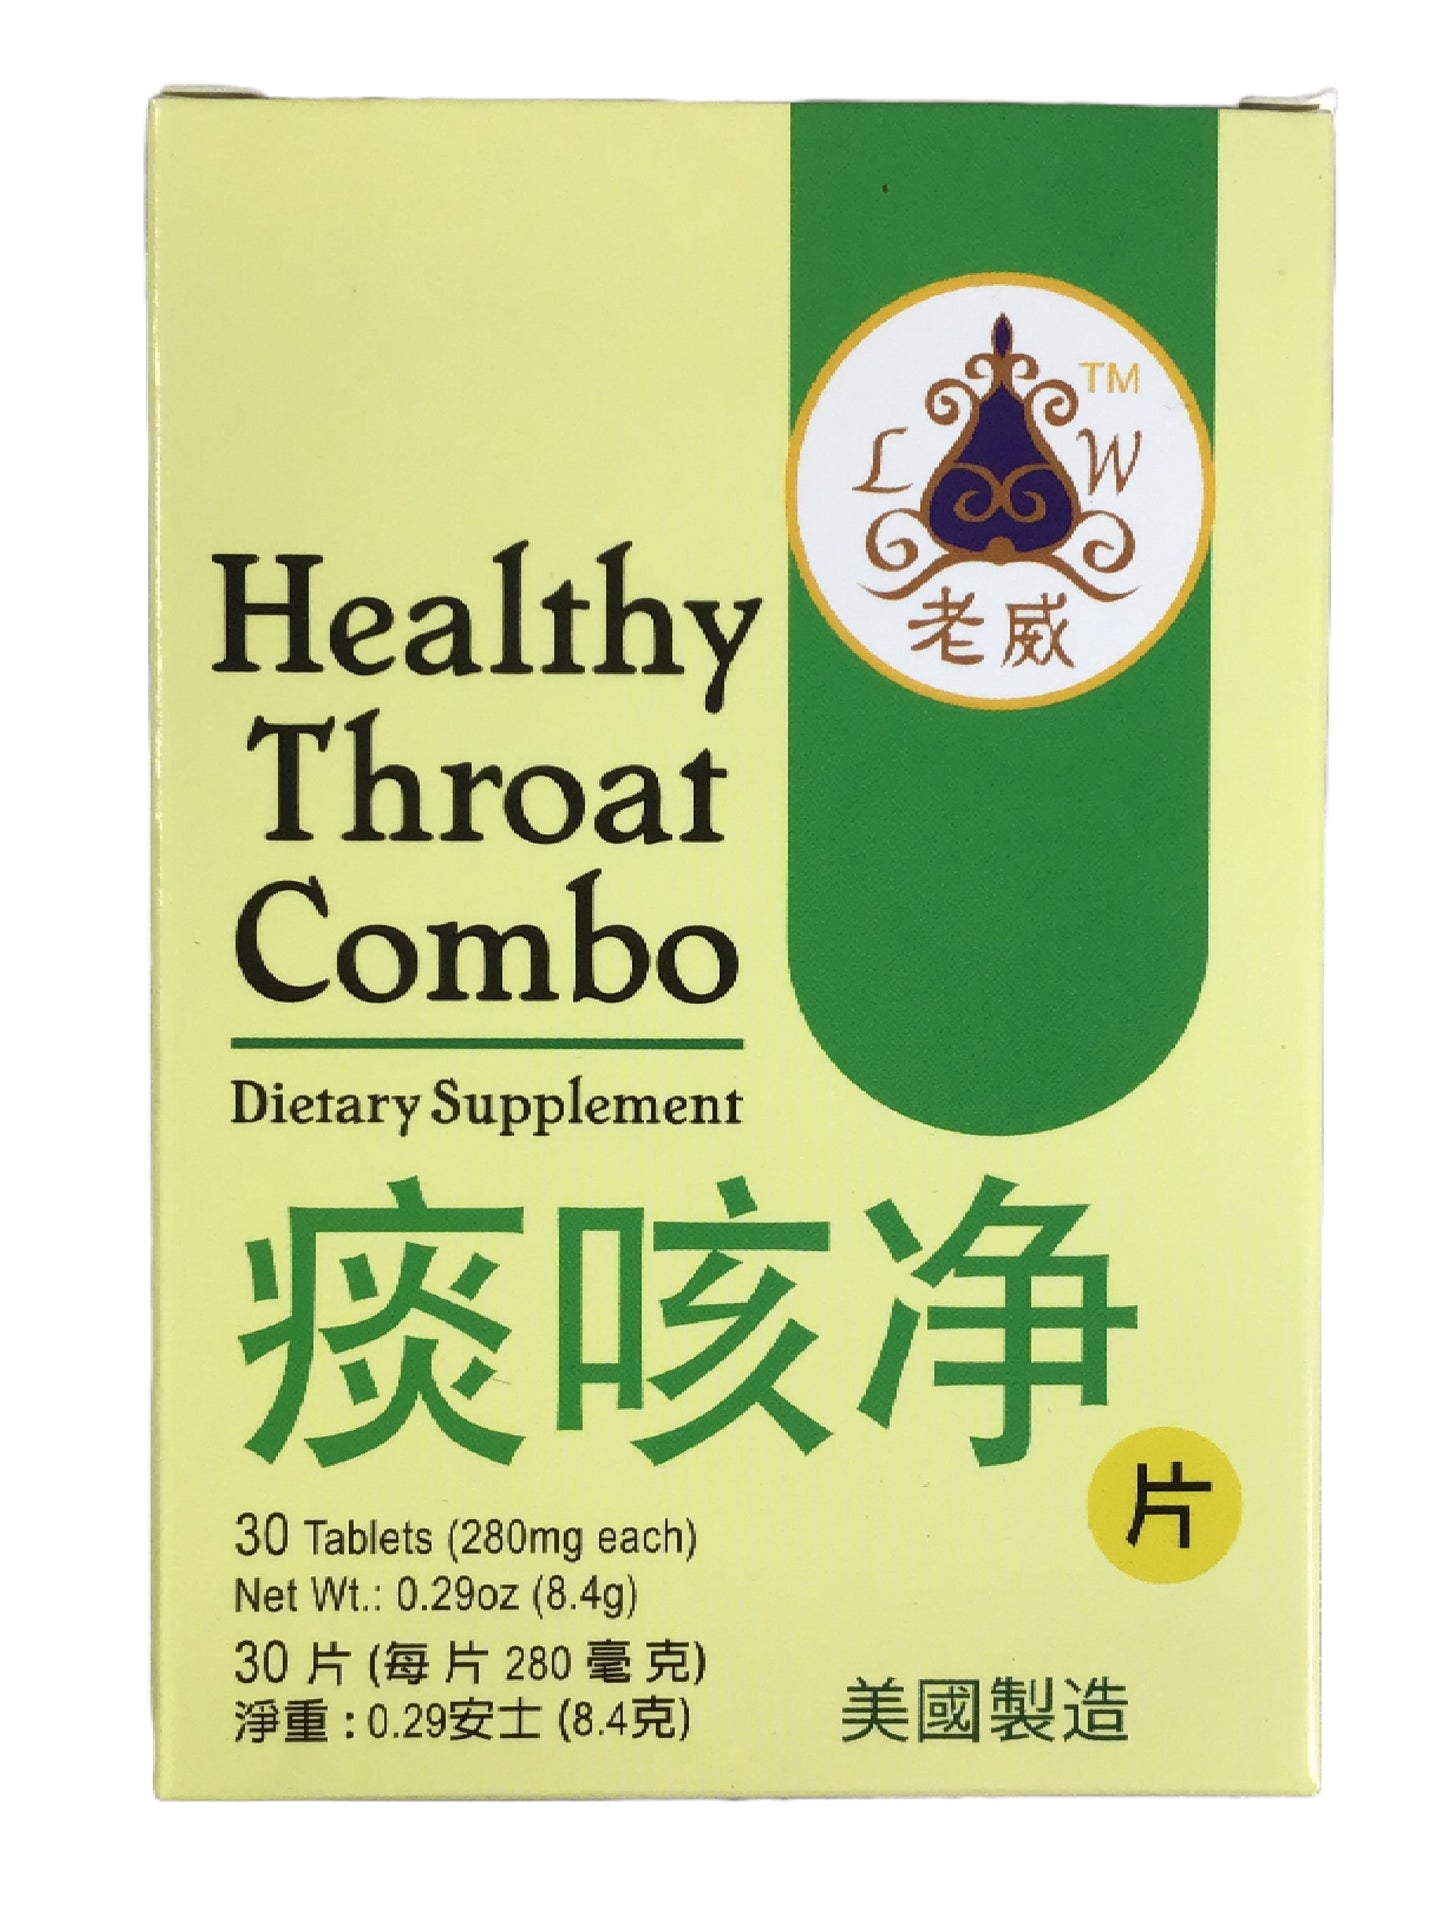 Healthy Throat Combo (30 Tablets) 老威 LW 痰咳净 (30片)